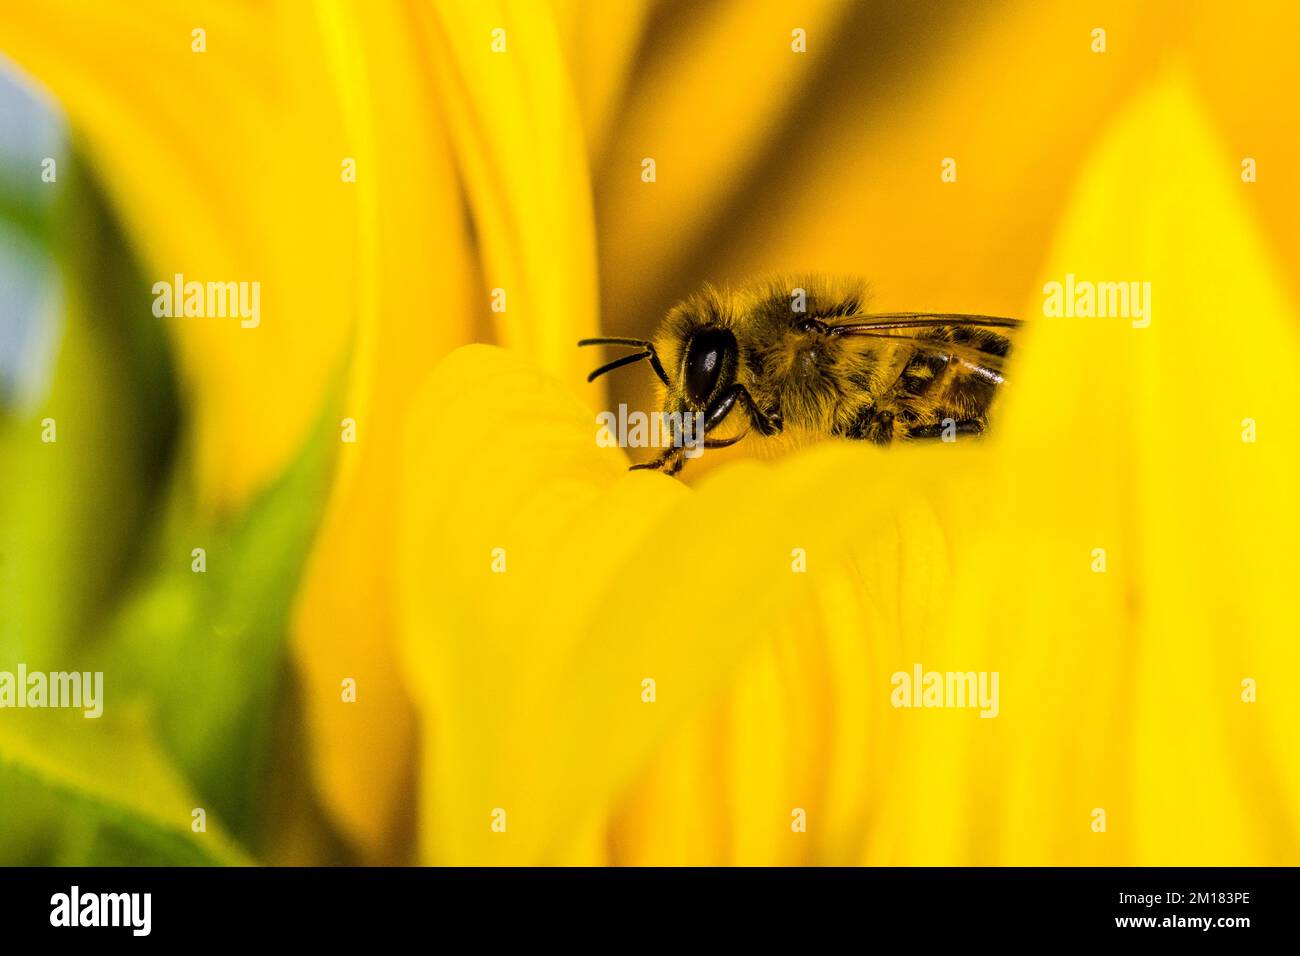 A Carniolan honey bee (Apis mellifera carnica) is sitting on a common sunflower (Helianthus annuus) leaf Stock Photo